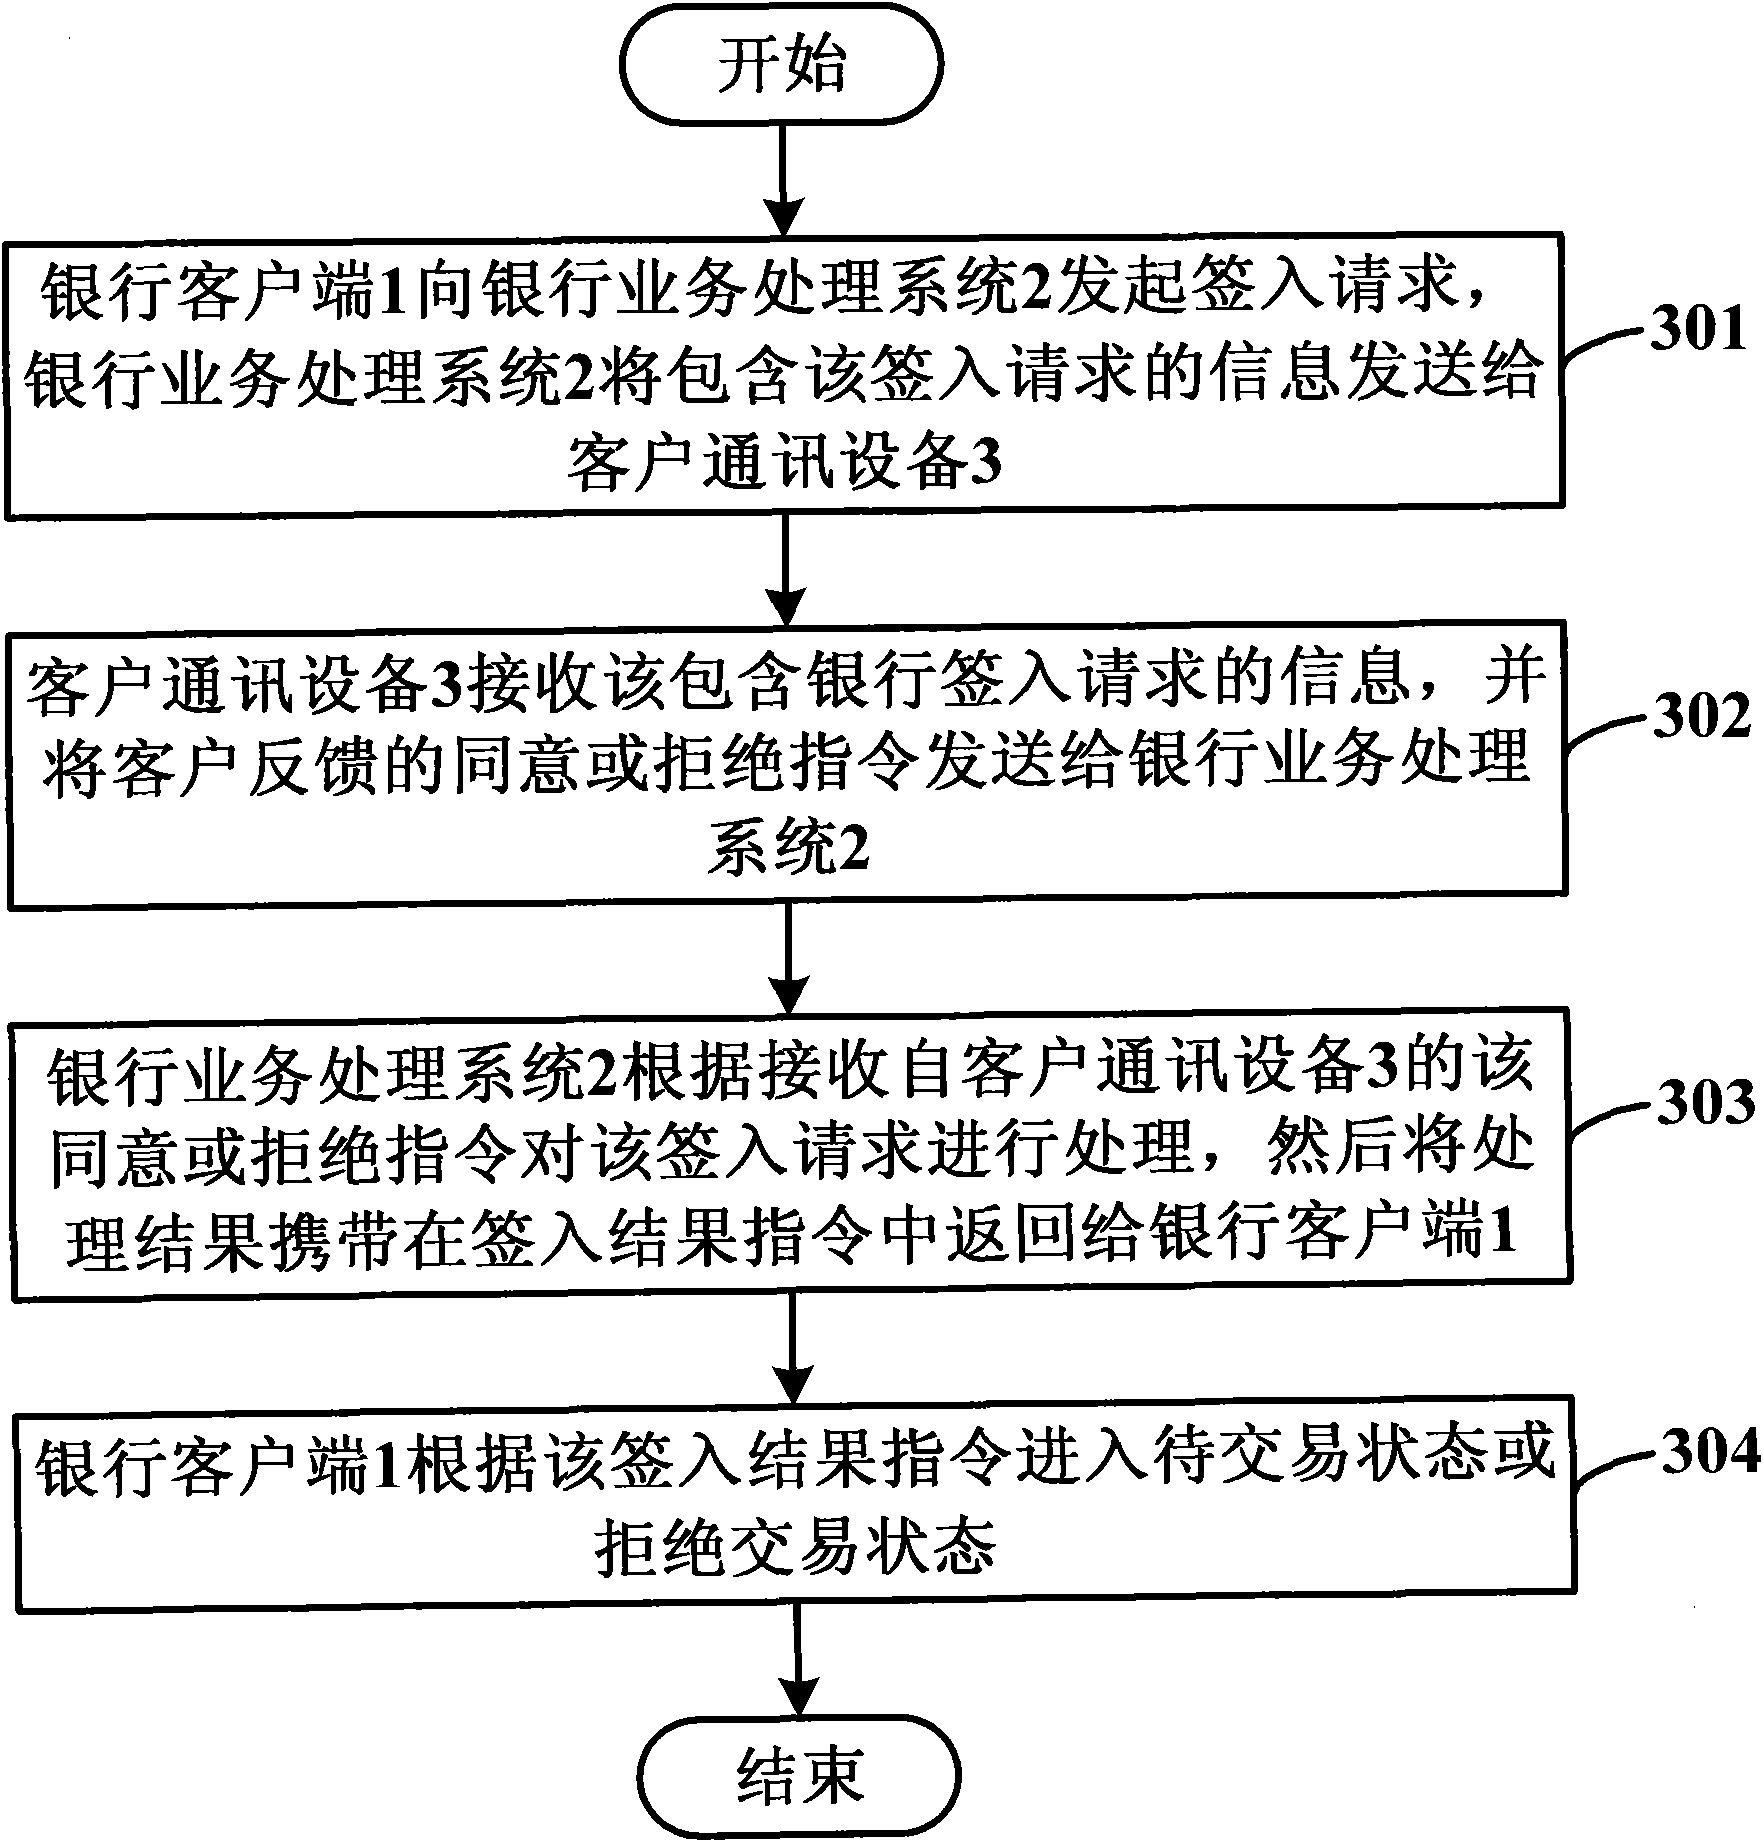 System, device and method for monitoring risks in bank login process